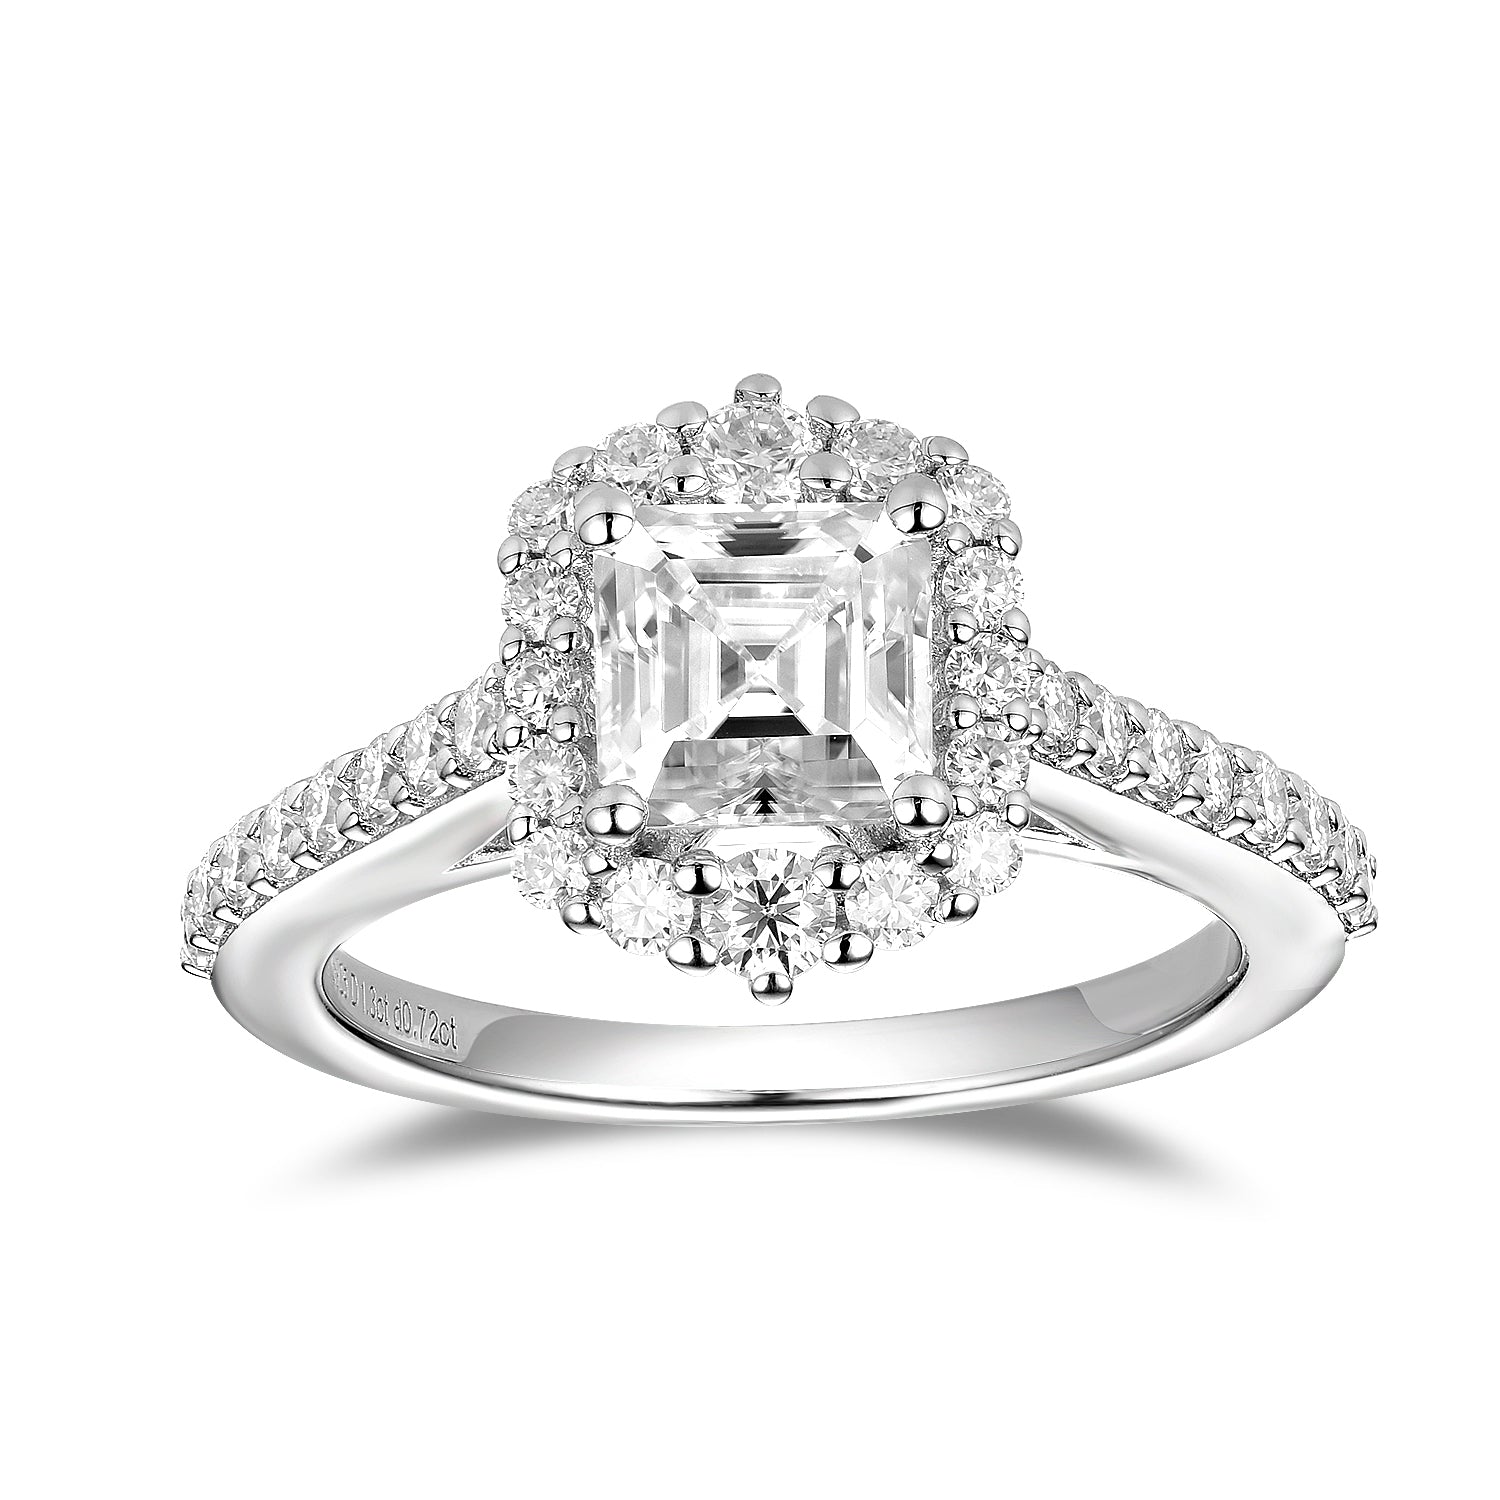 DovEggs sterling silver 1.3 carat halo asscher moissanite engagement ring